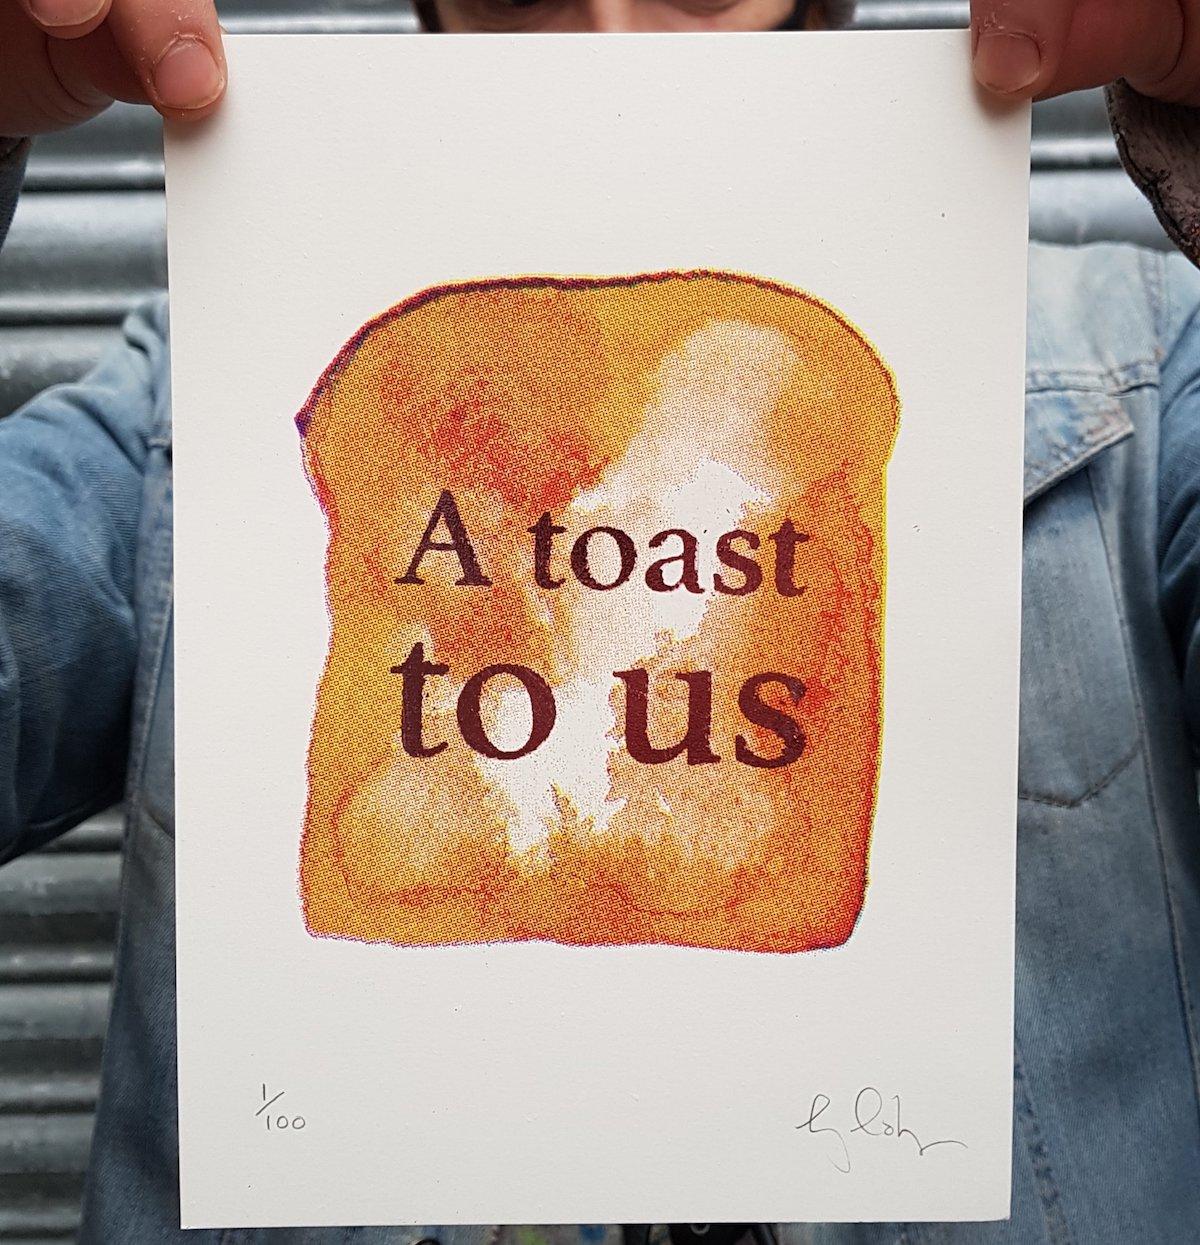 A Toast to Us and Mini Saucy  - Pop Art Print by Gavin Dobson 